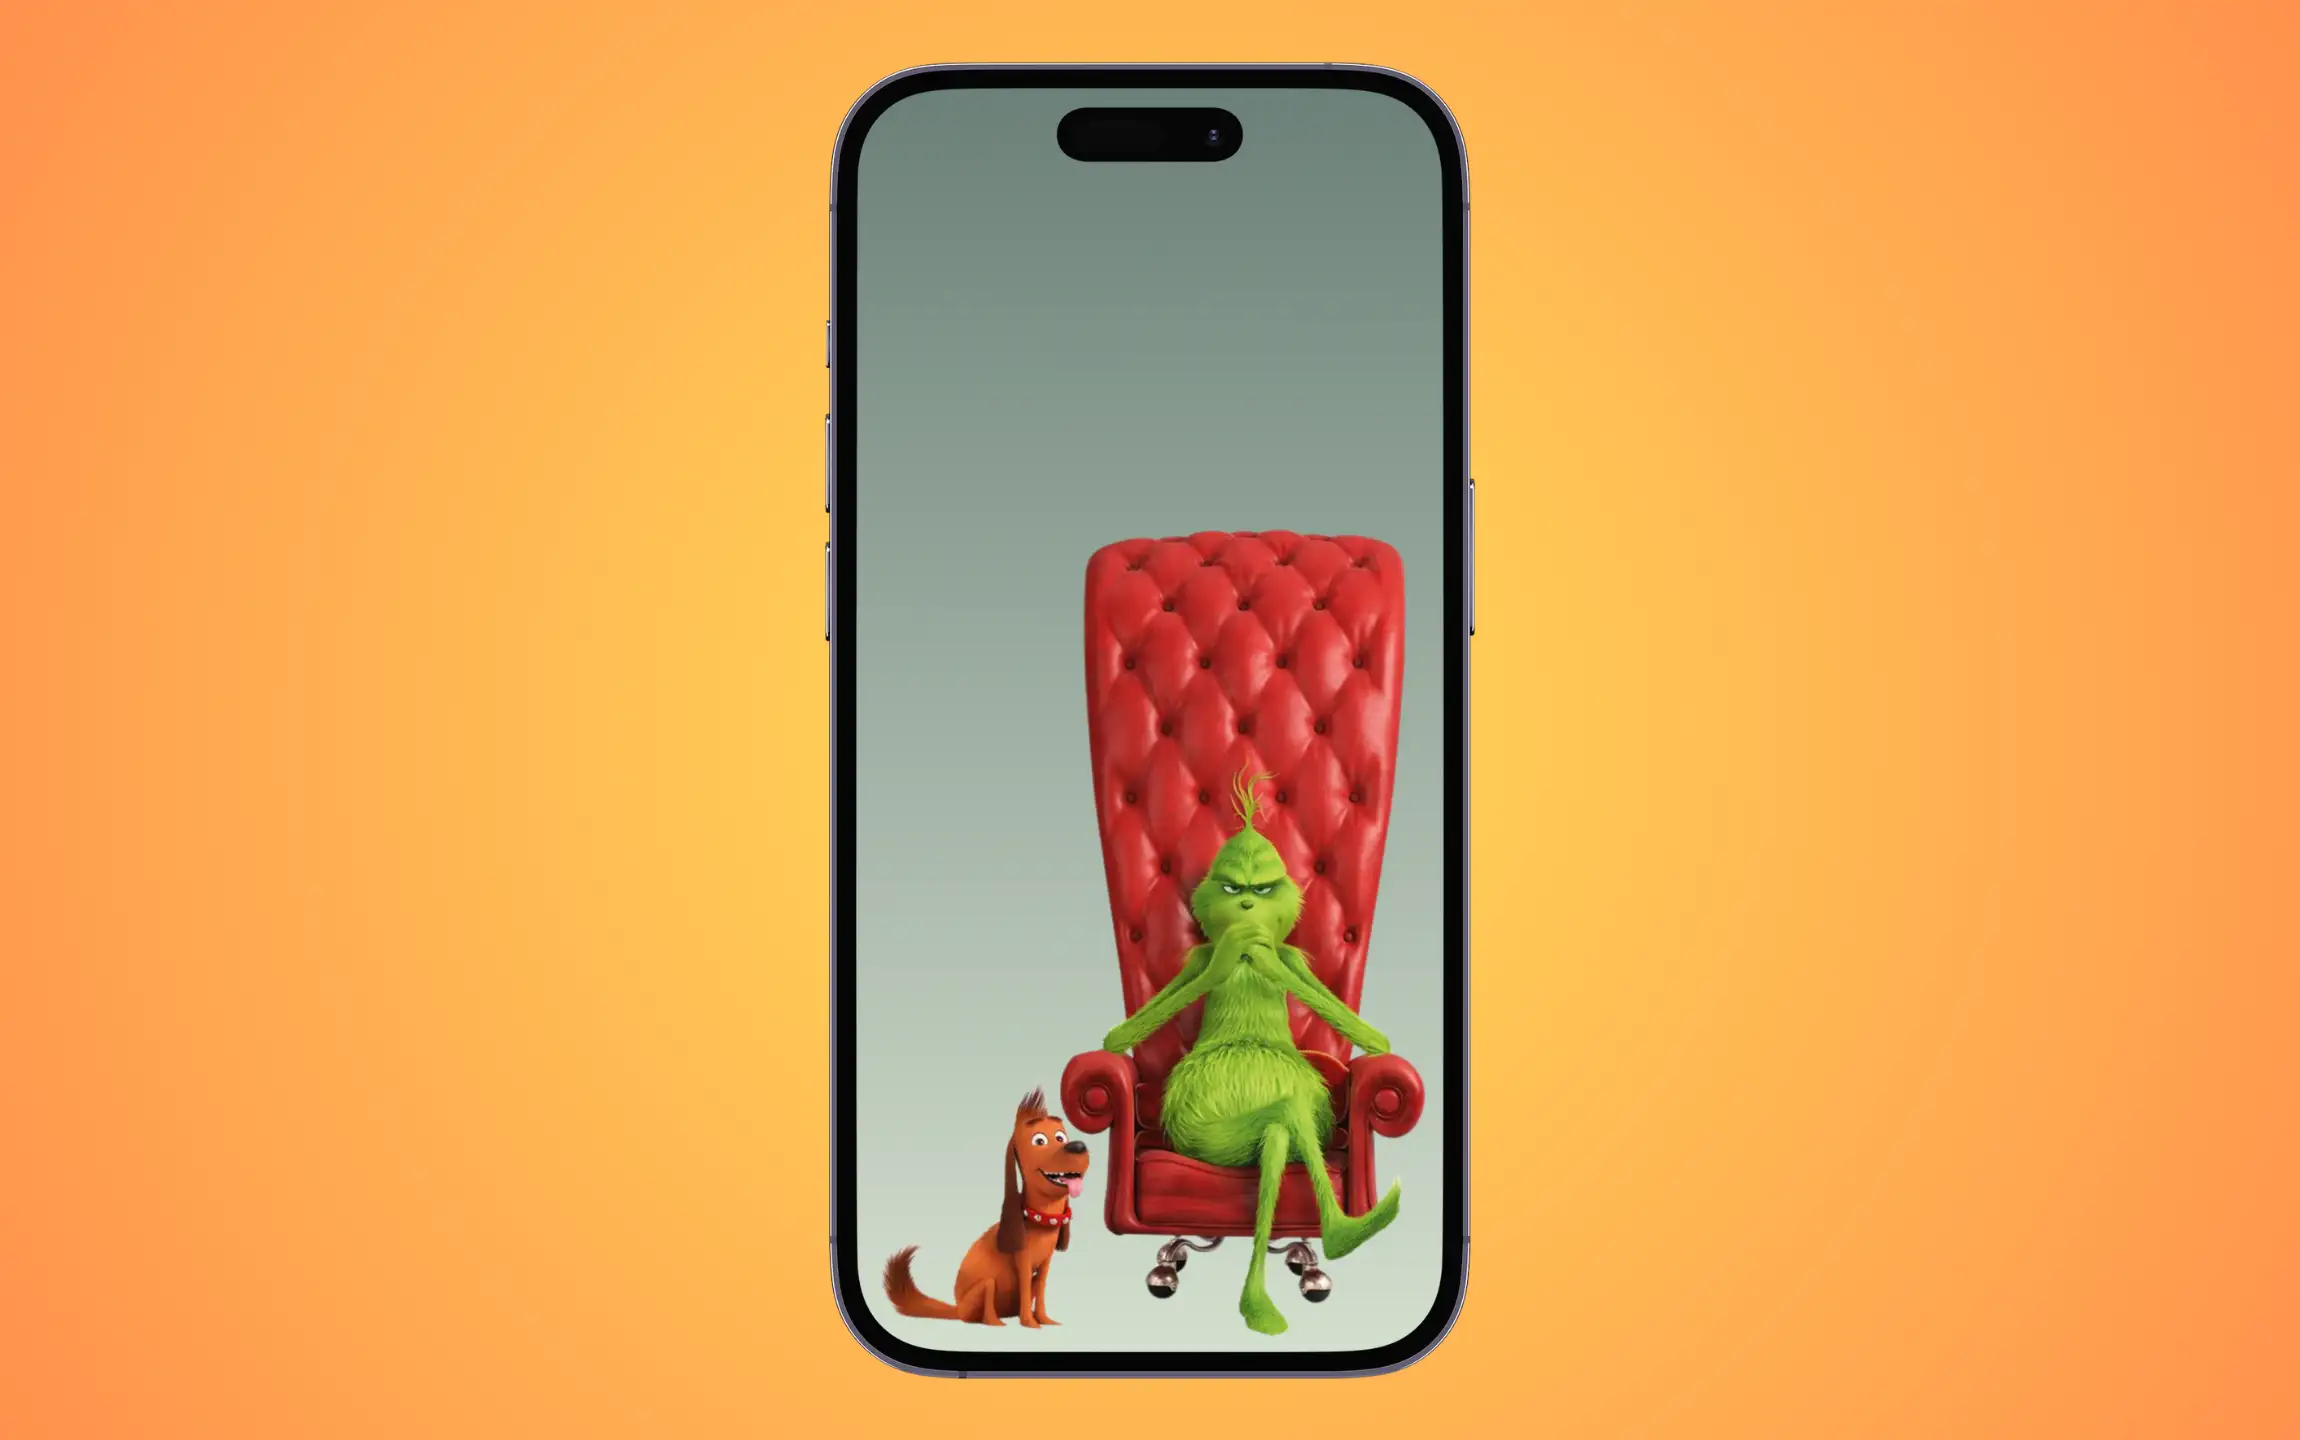 Grinch and doggy wallpaper for iPhone